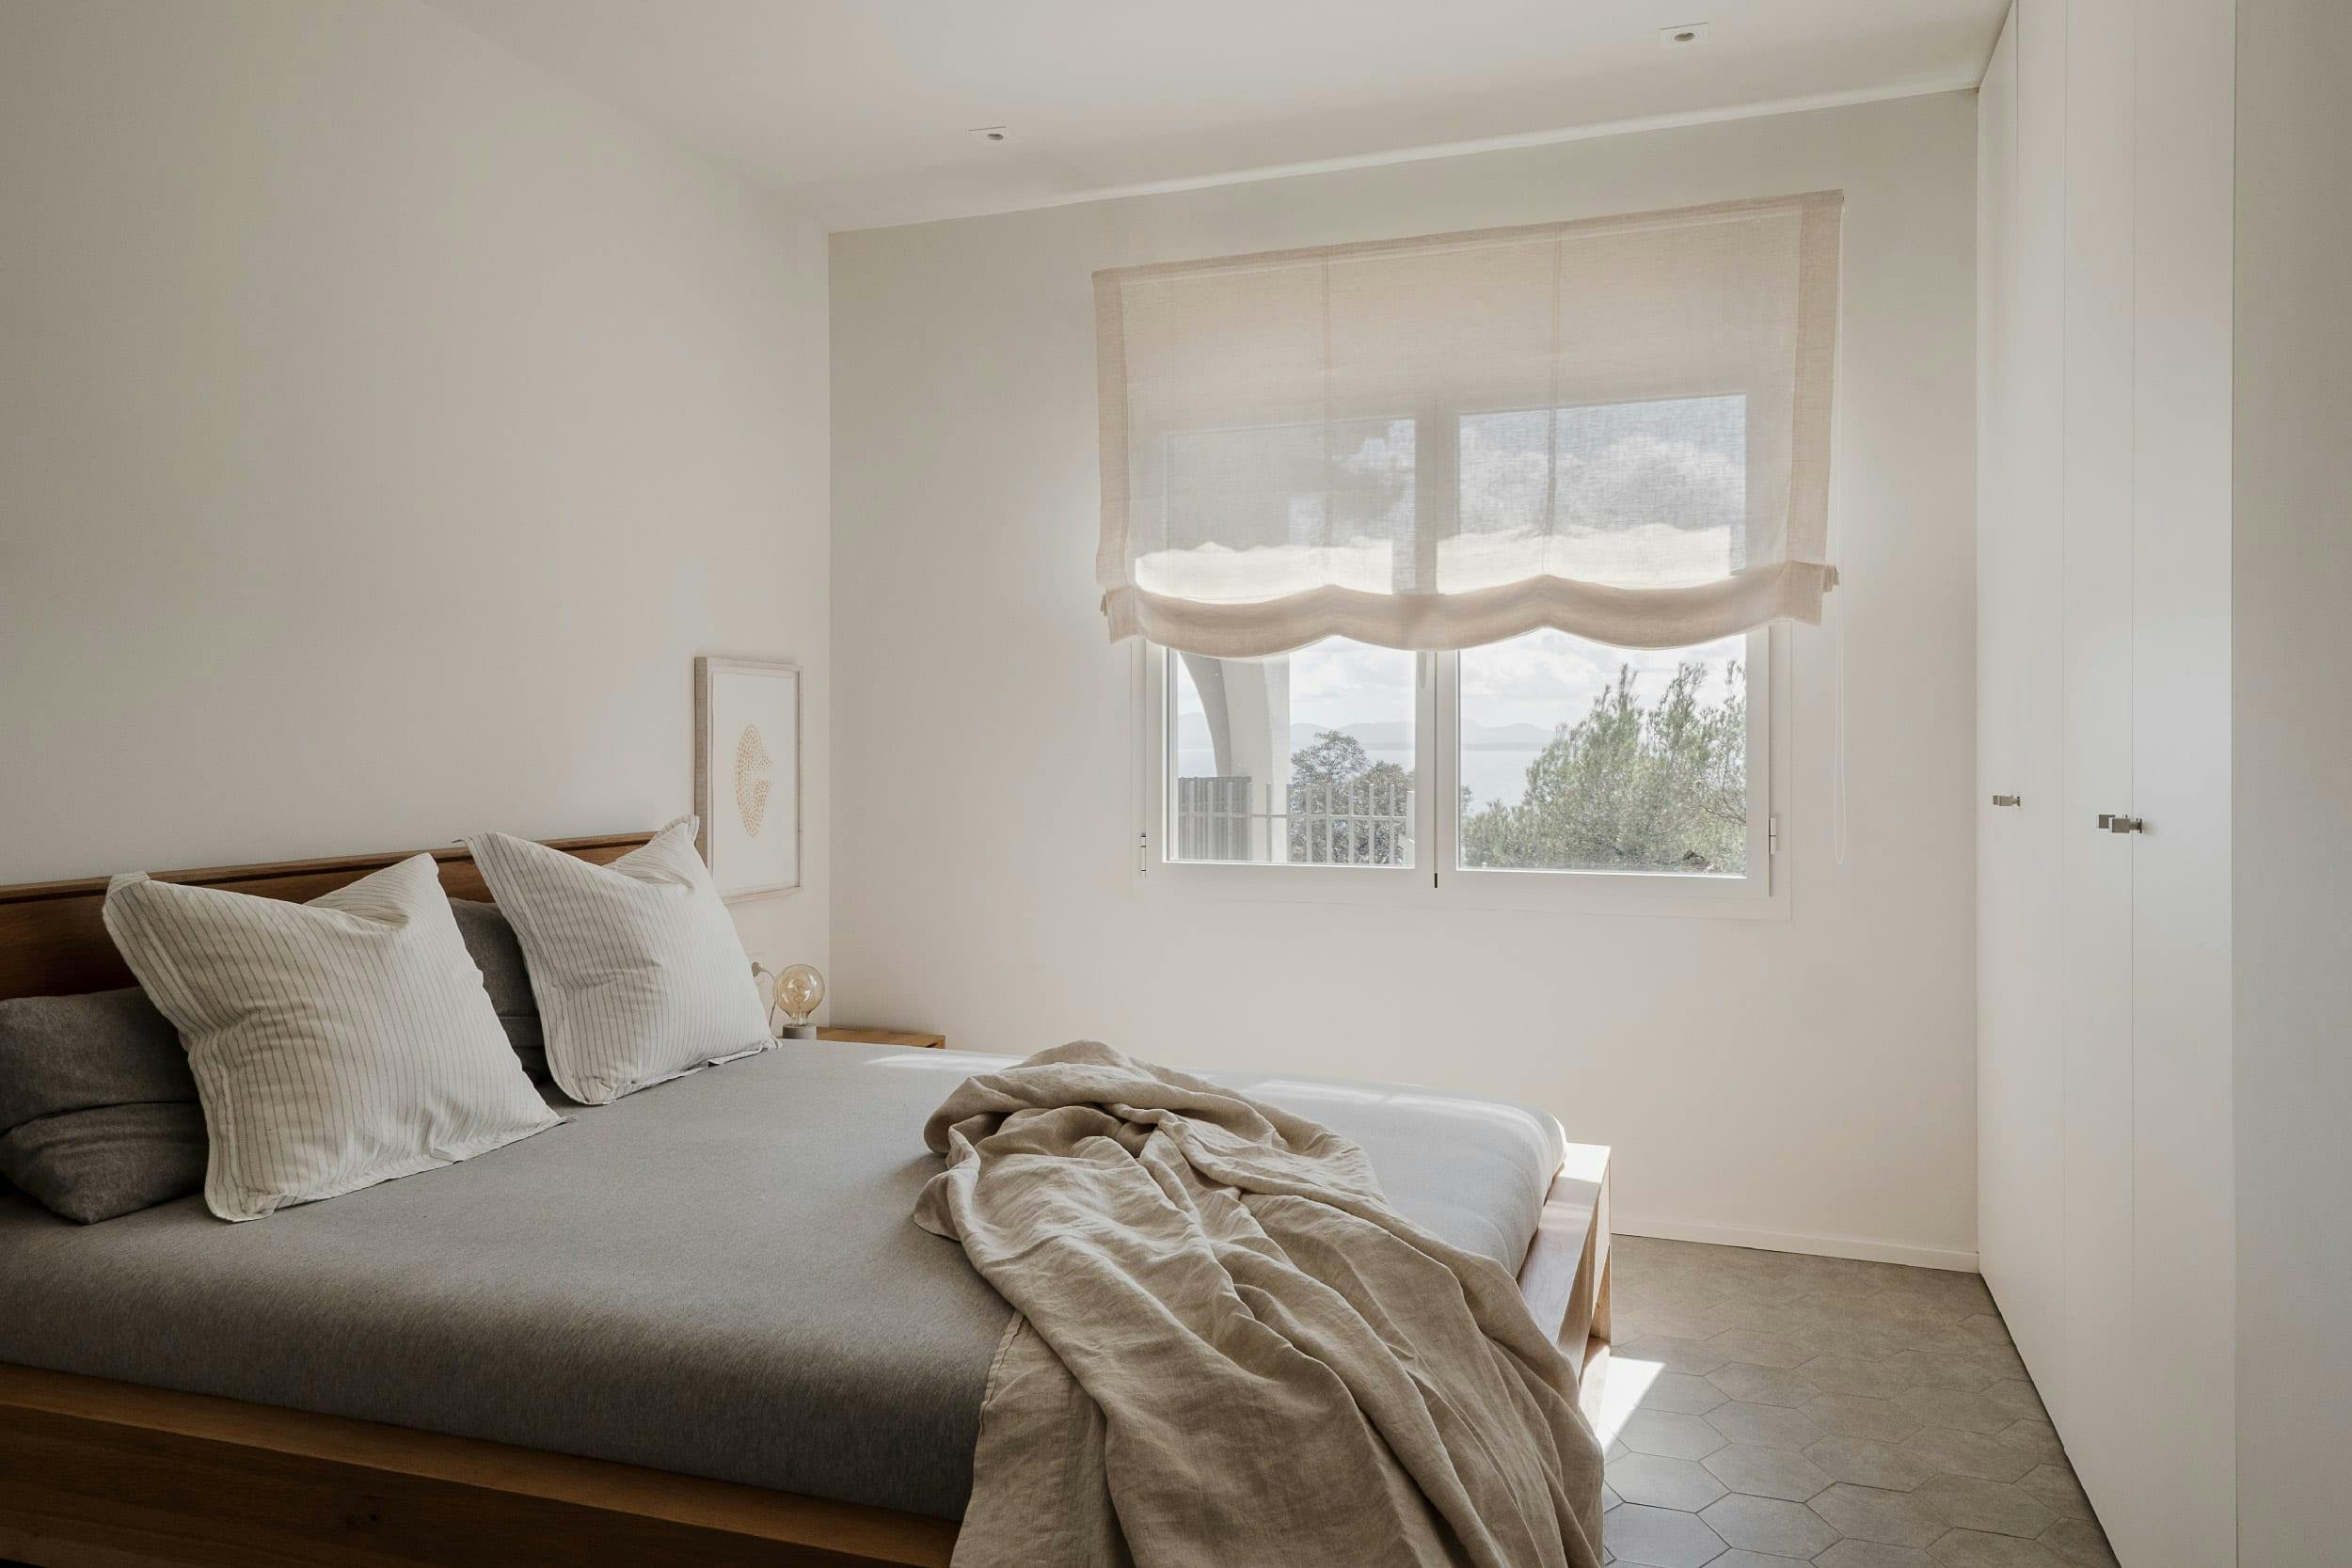 The image features a large bedroom with a neatly made bed, a window, and a white curtain.